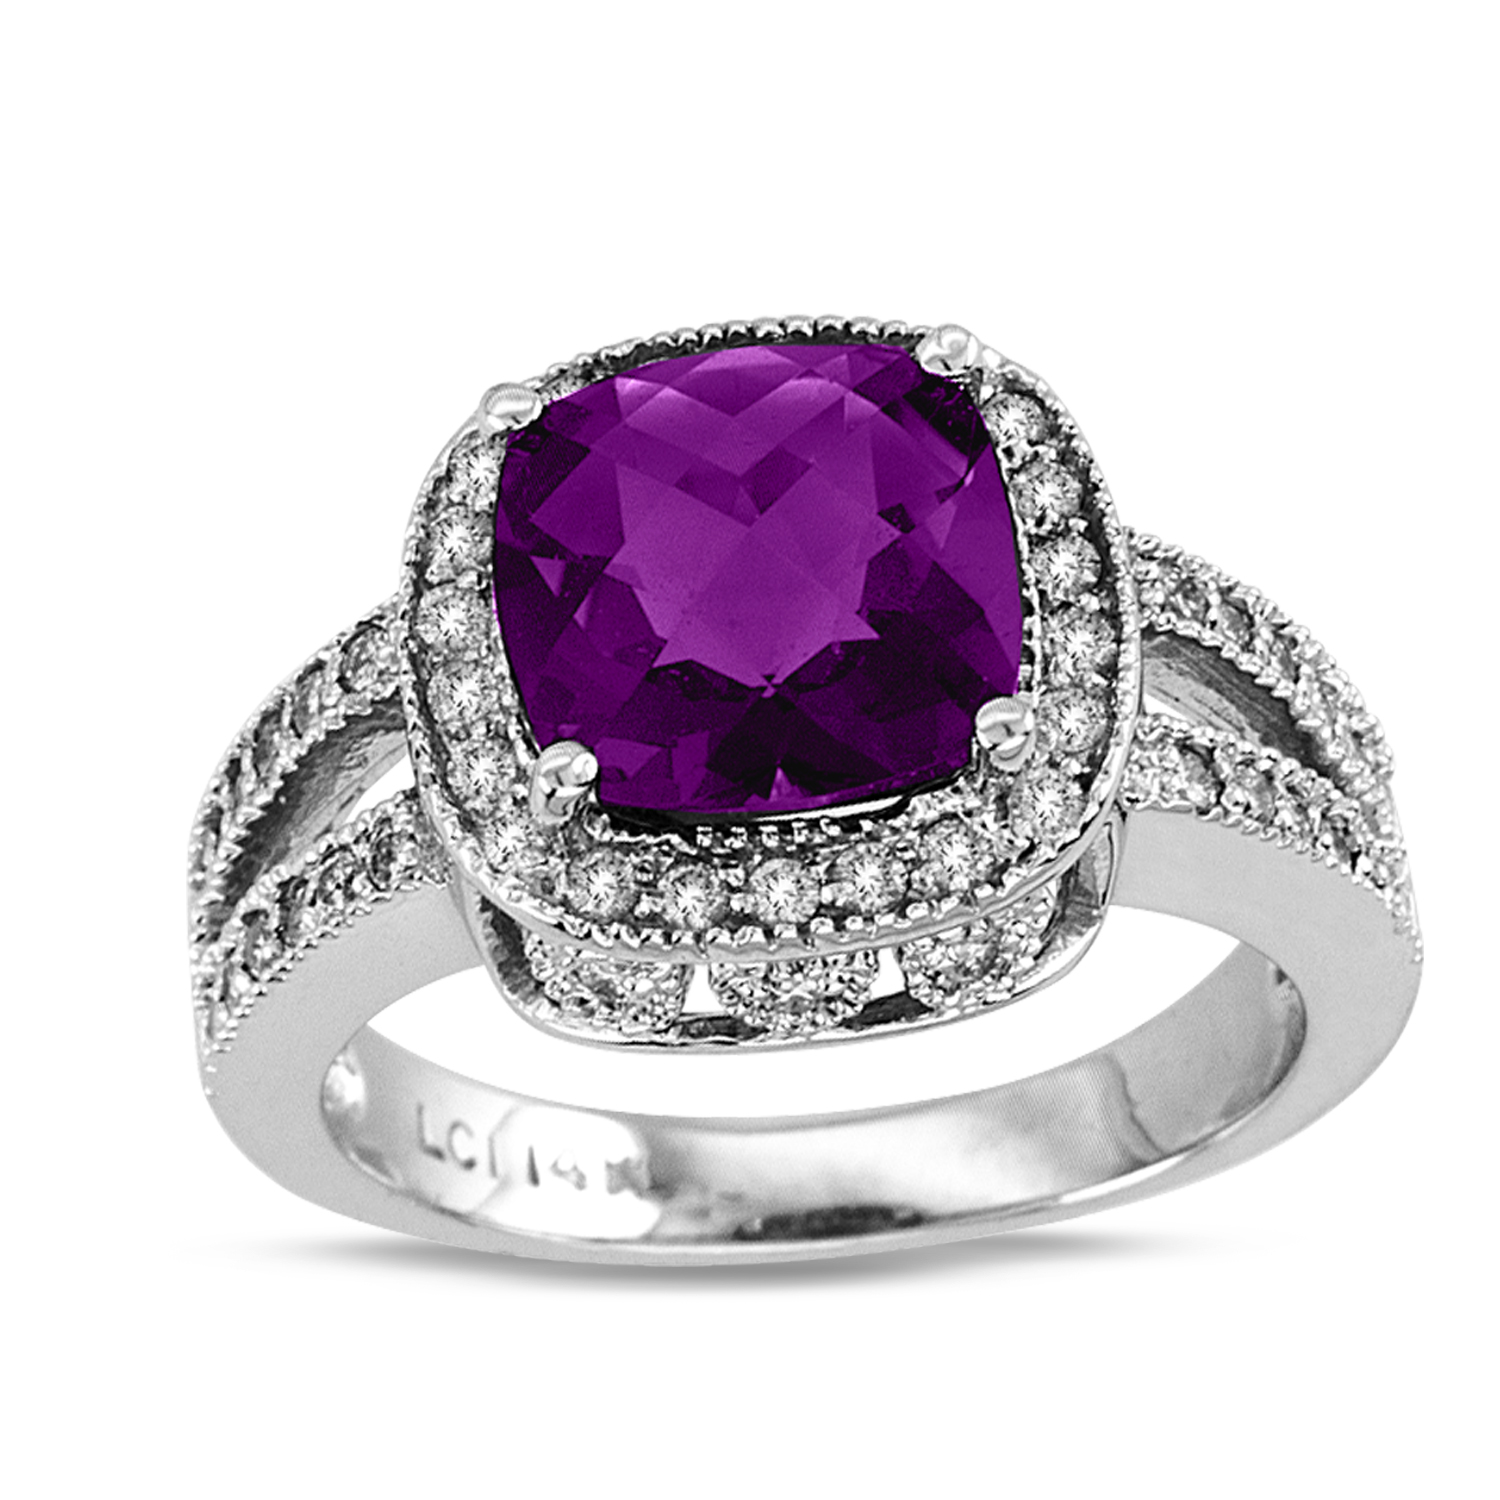 View 14k Gold Split Shank Ring with 0.50ct tw of Round Diamonds and 9mm Checkerboard Cushion Cut Amethyst Center Stone